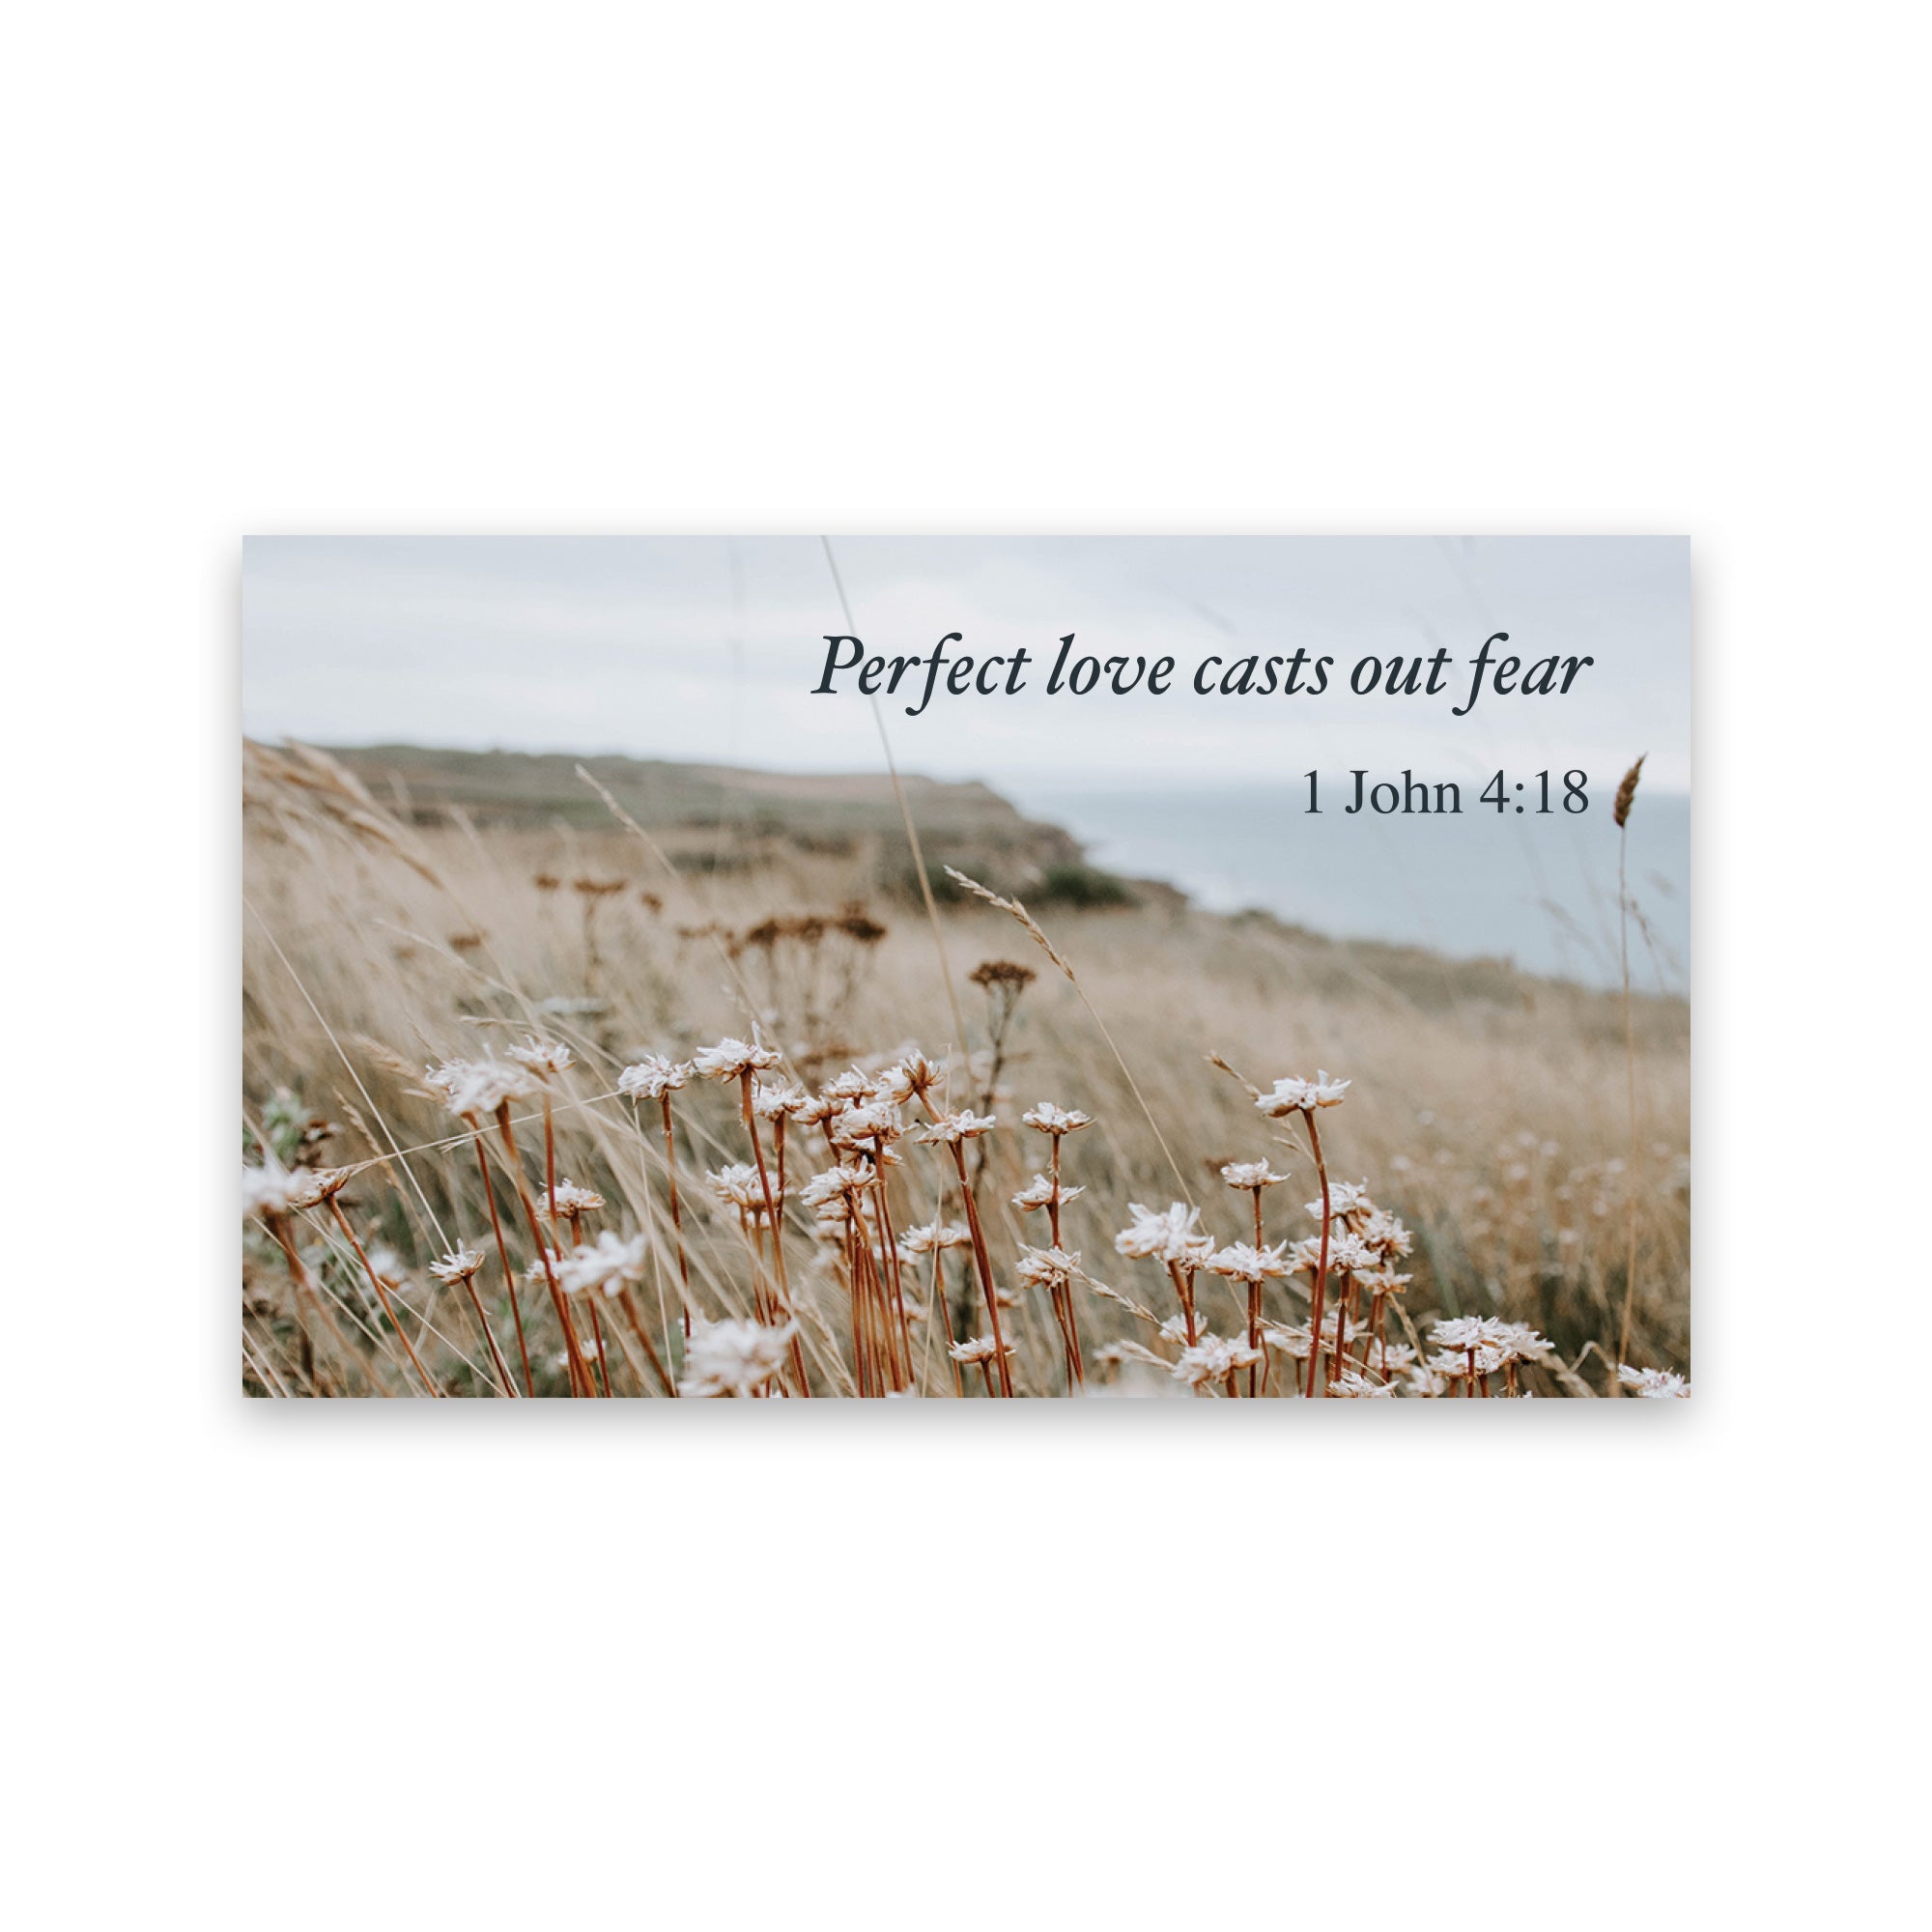 Perfect love casts out fear, 1 John 4:18, Pass Along Scripture Cards, Pack of 25